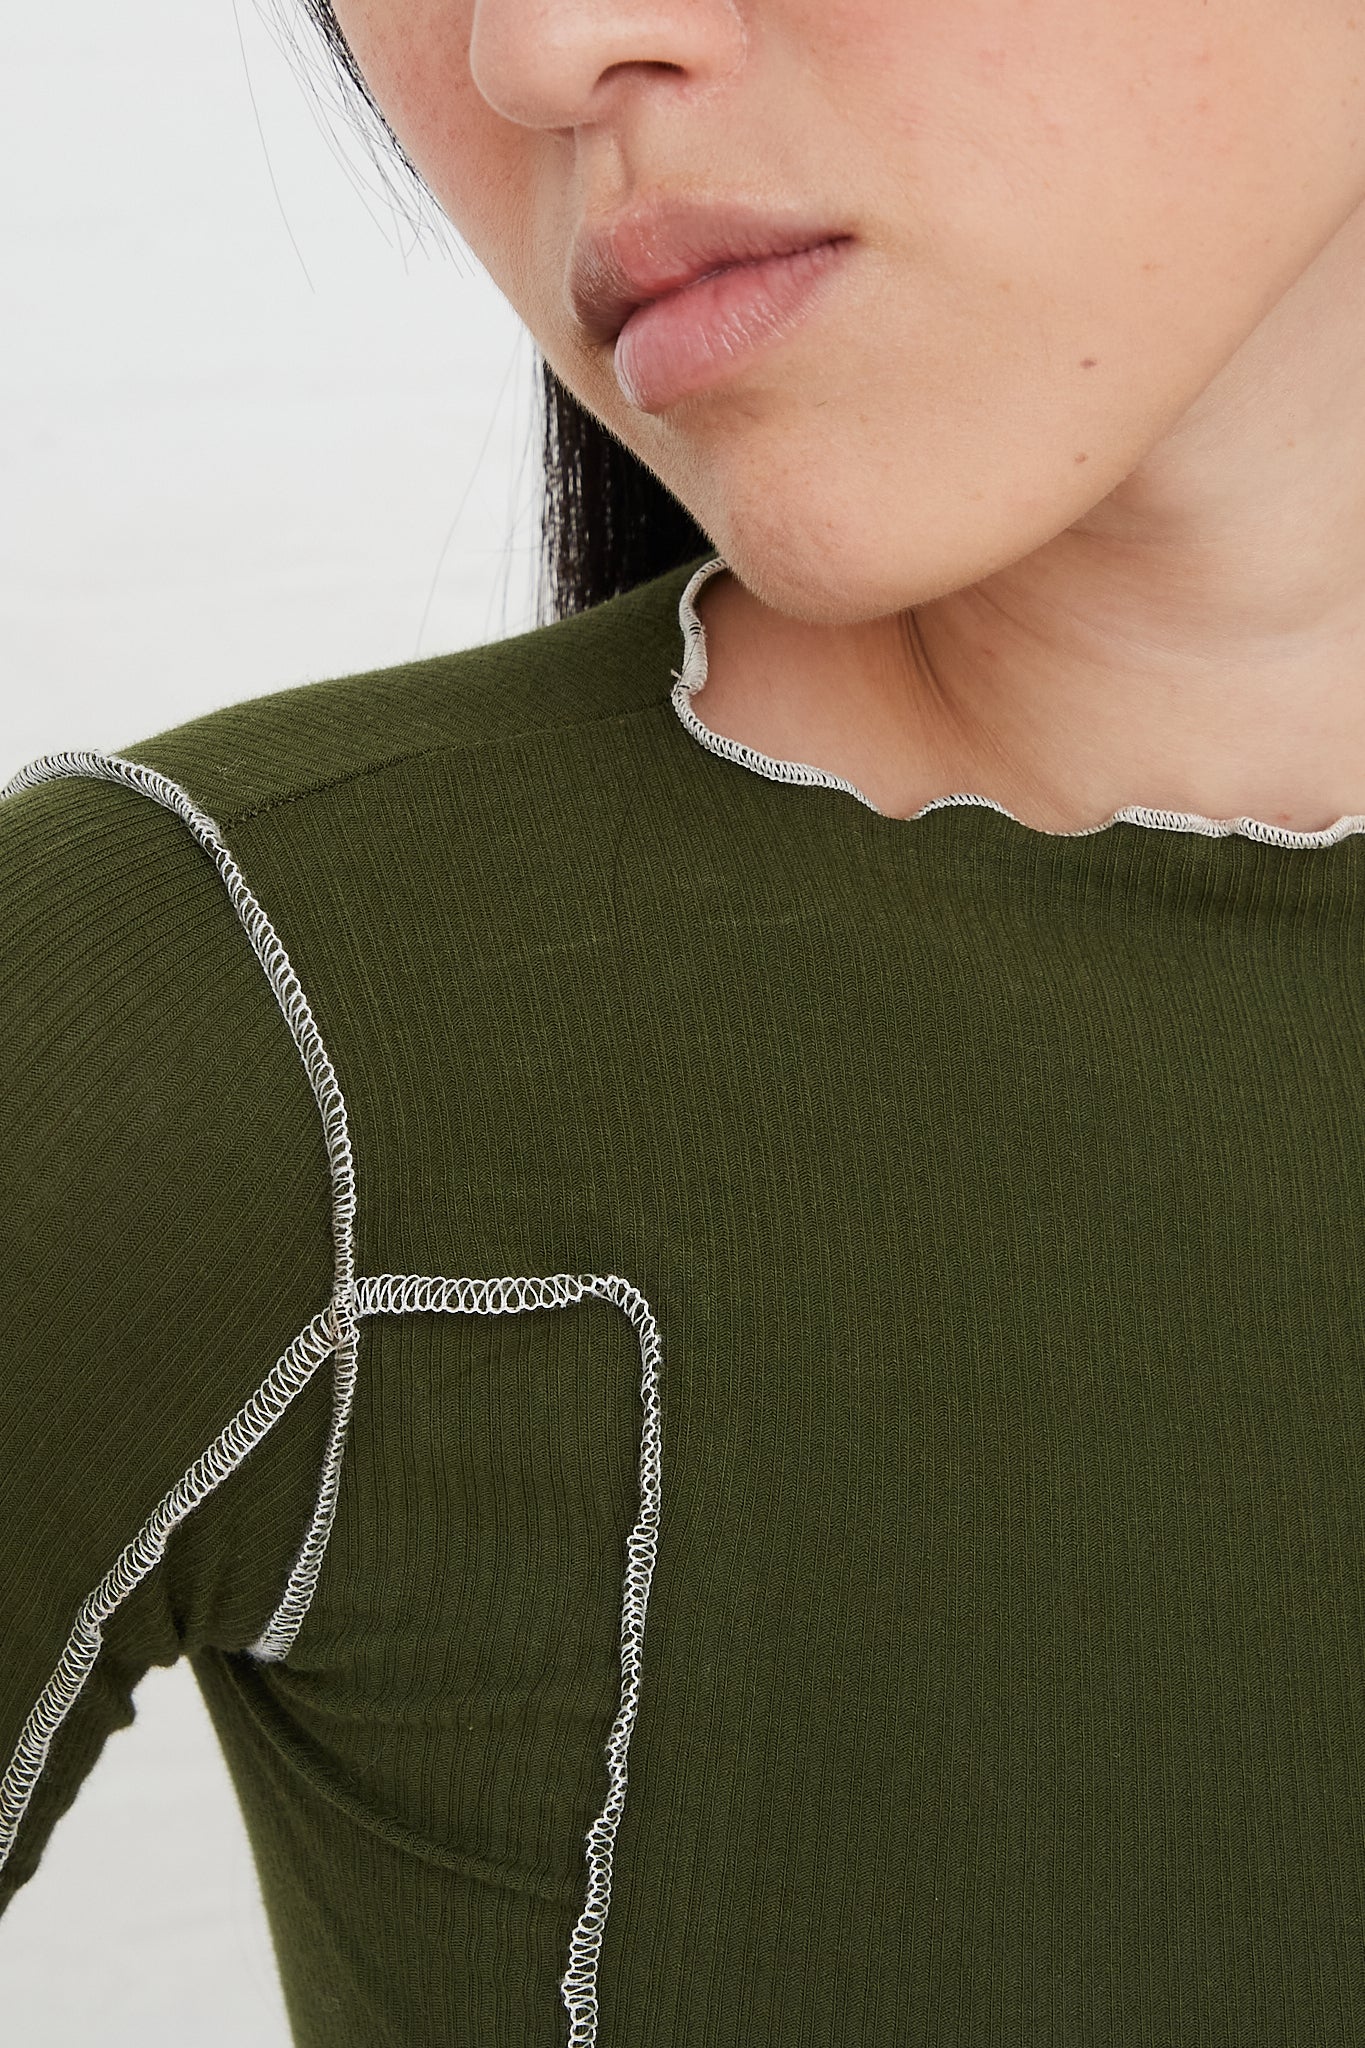 Omato Long Sleeve Turtleneck Tee in Green by Baserange for Oroboro Front Upclose